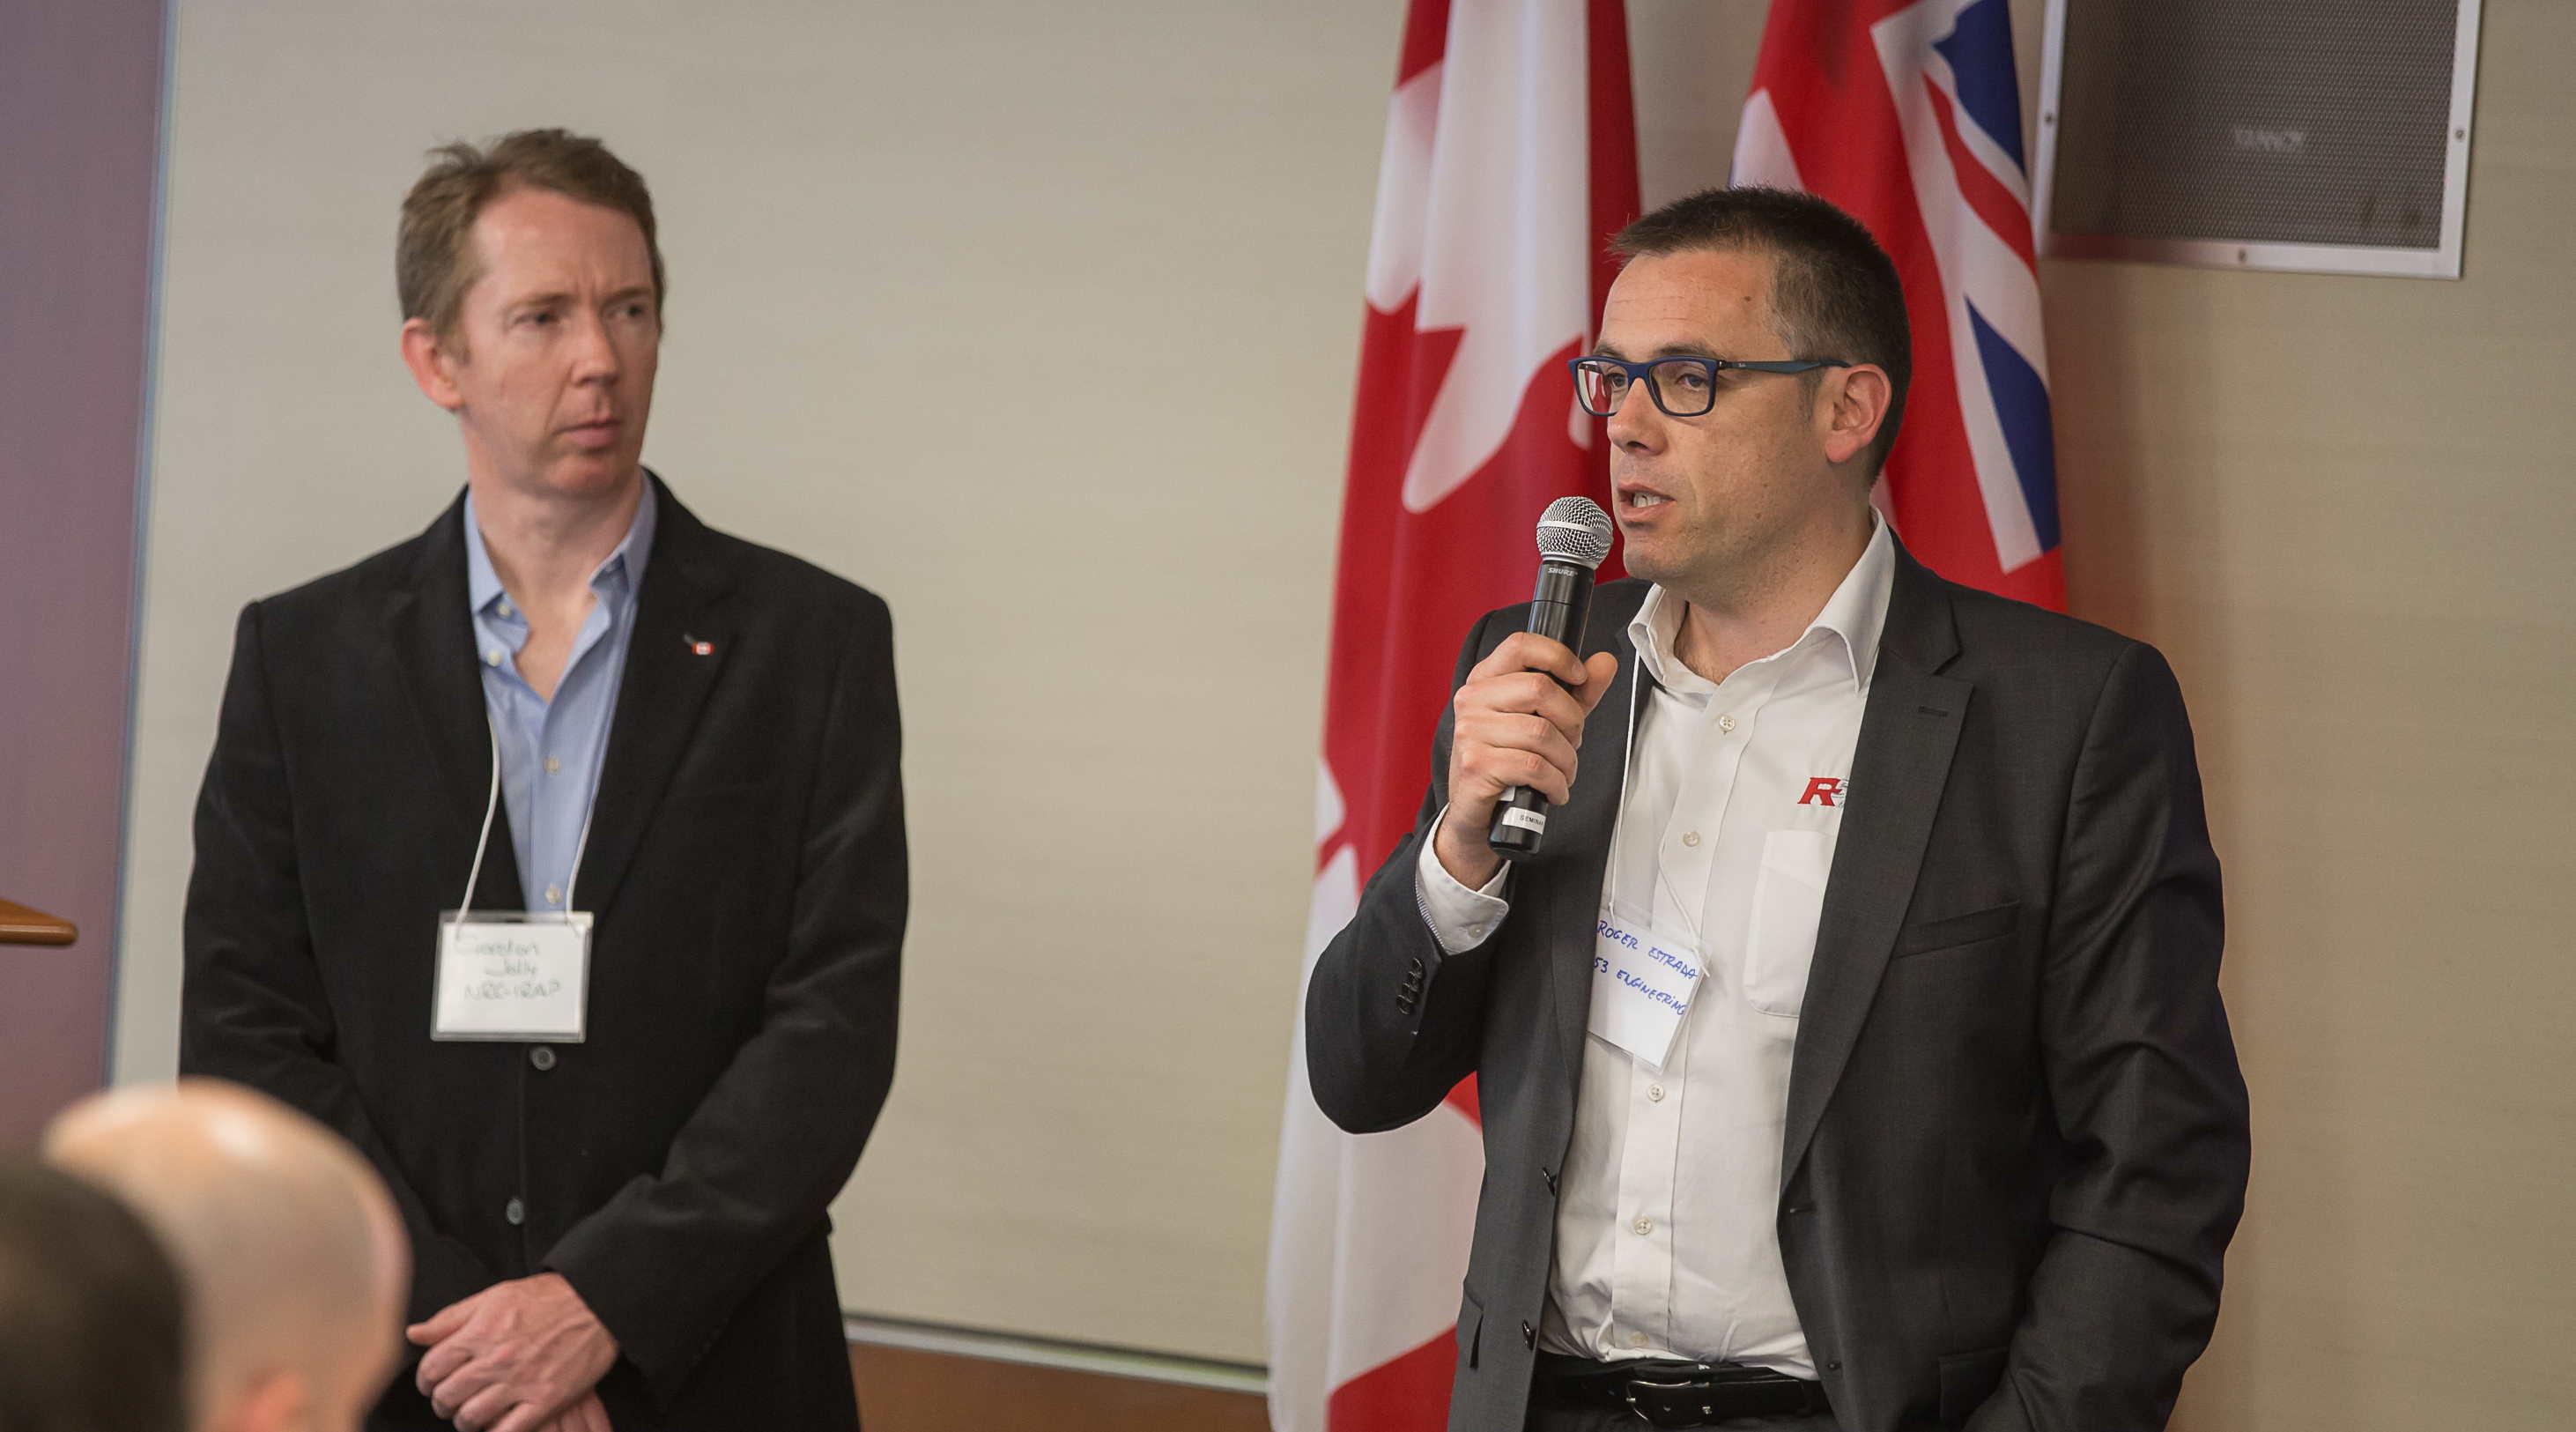 Roger Estrada, CEO of R53 Engineering, using a microphone to address an event during the GBIP visit to Canada. Looking on (left) is Gordon Jolly, ‎Industrial Technology Advisor - ‎National Research Council Canada. UK and Canadian flags on the wall behind.